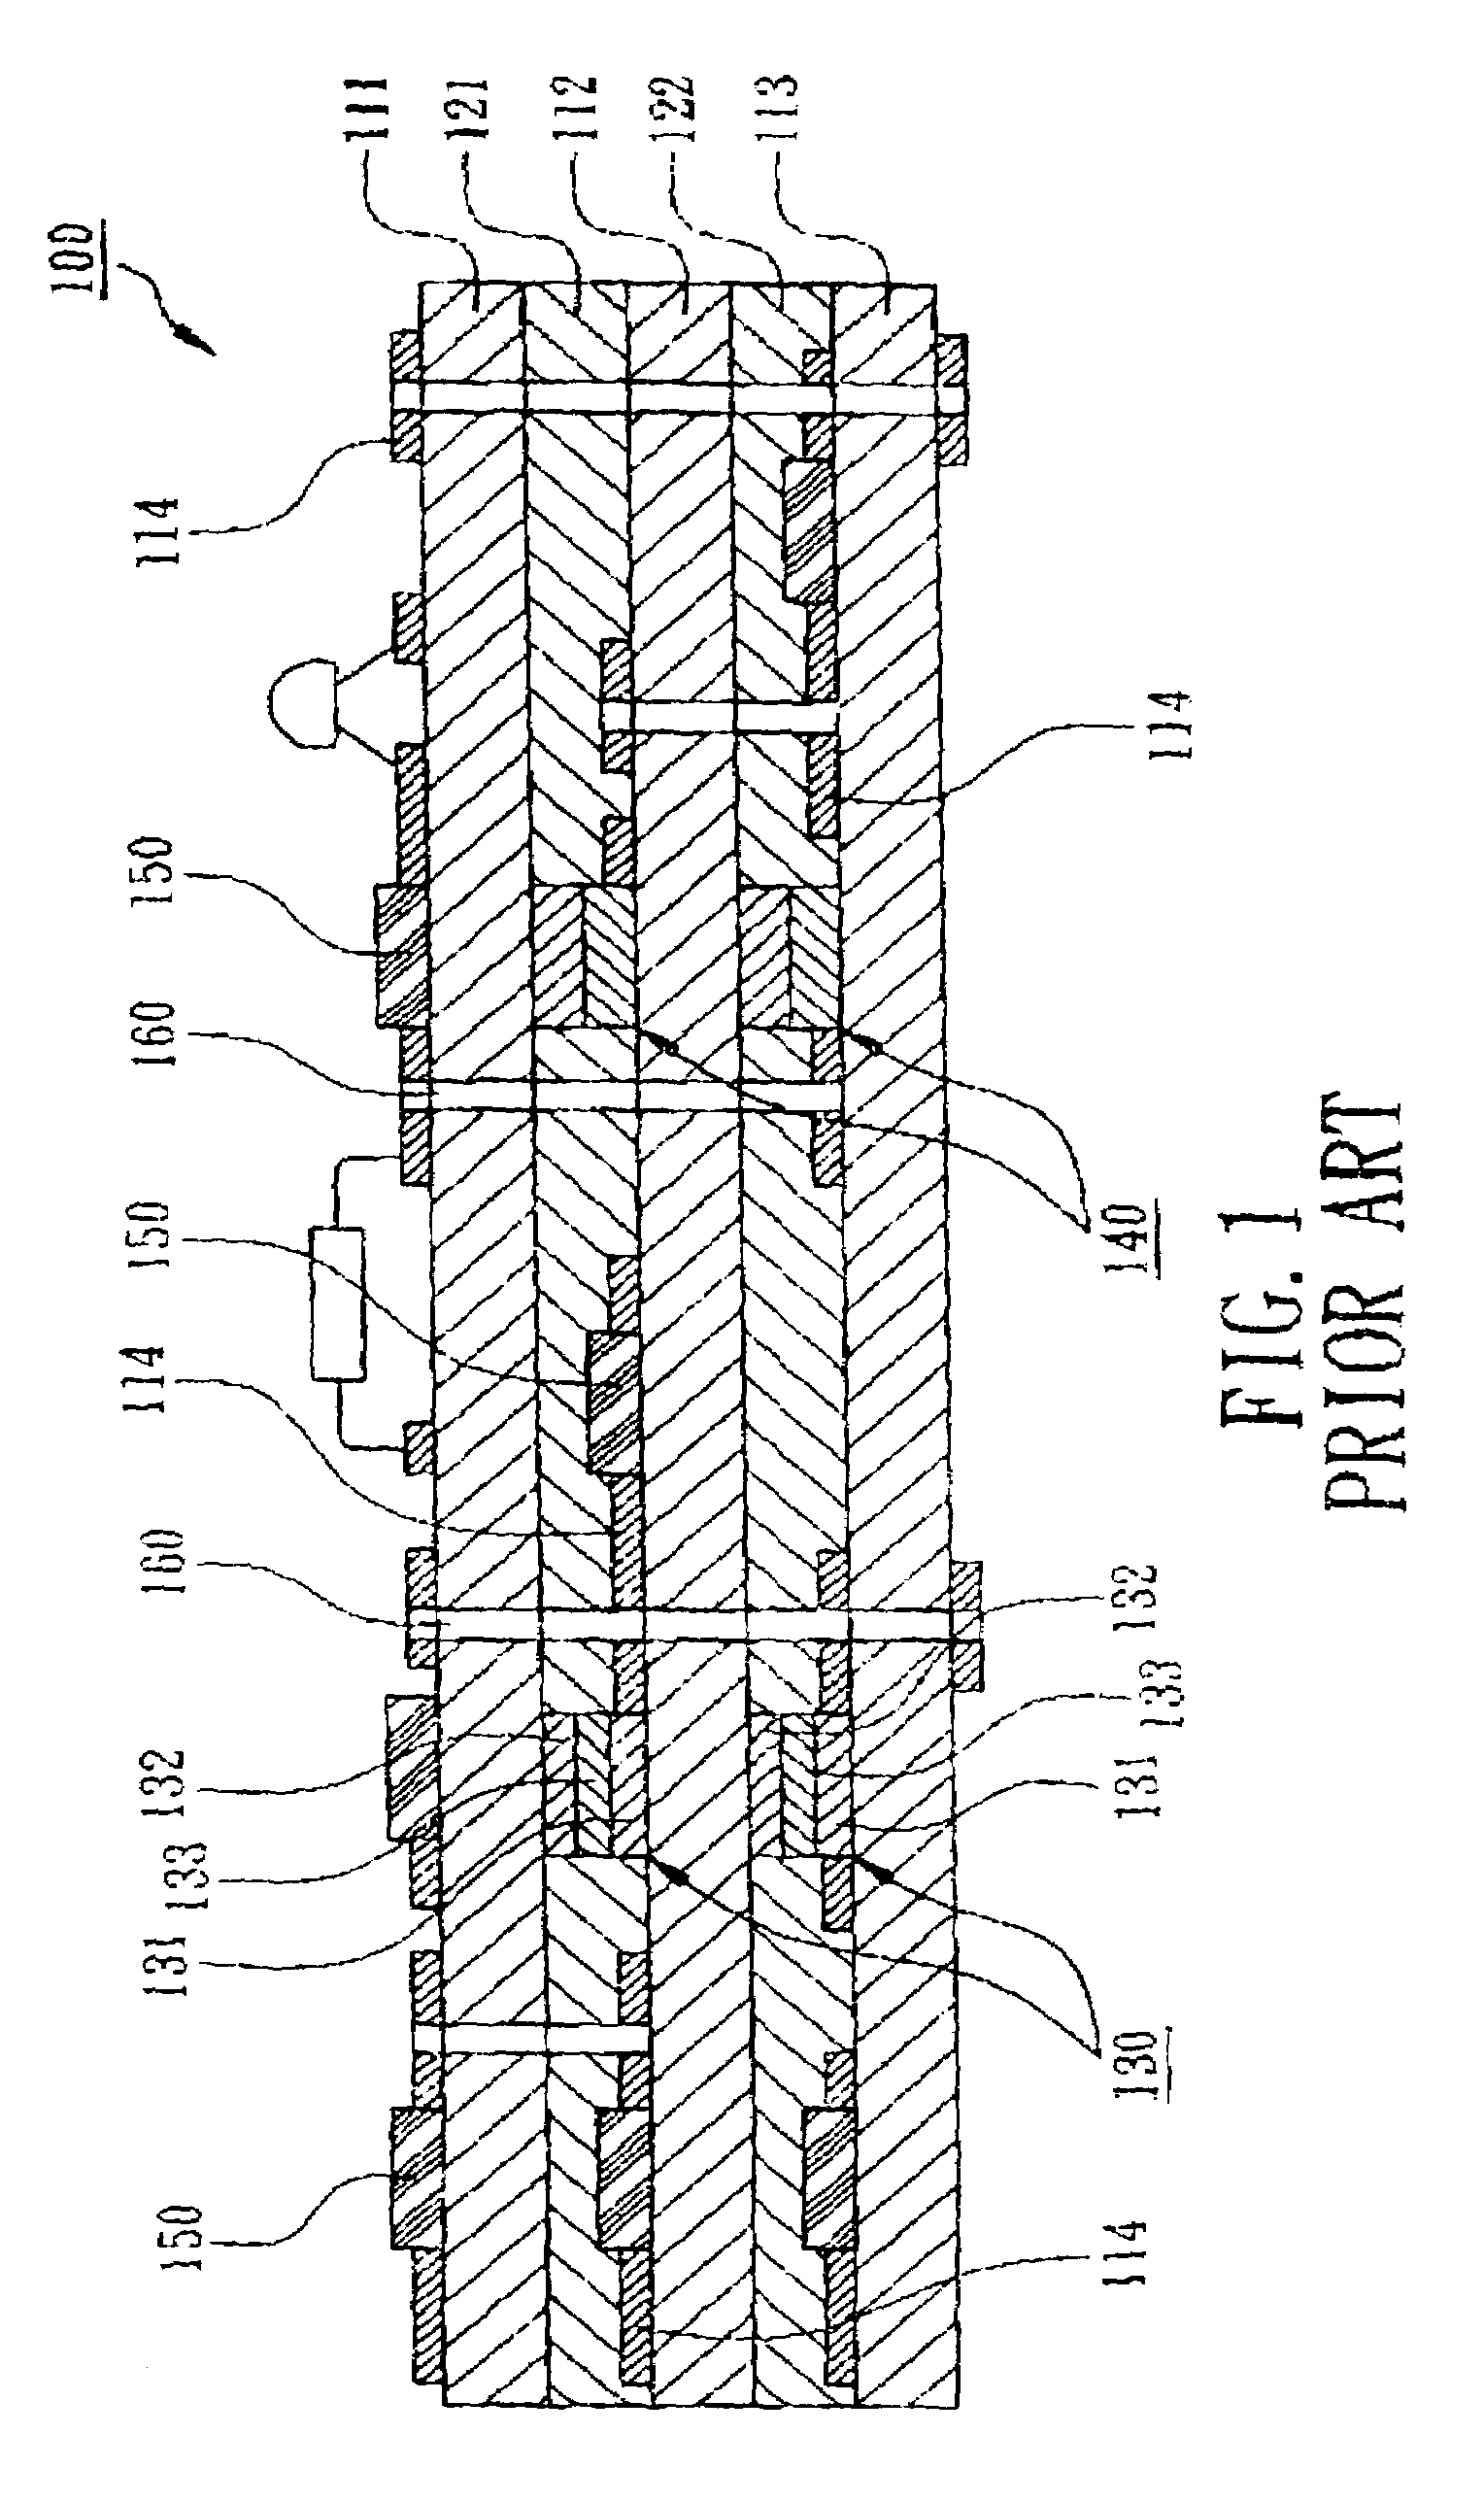 Process for manufacturing a substrate with embedded capacitor